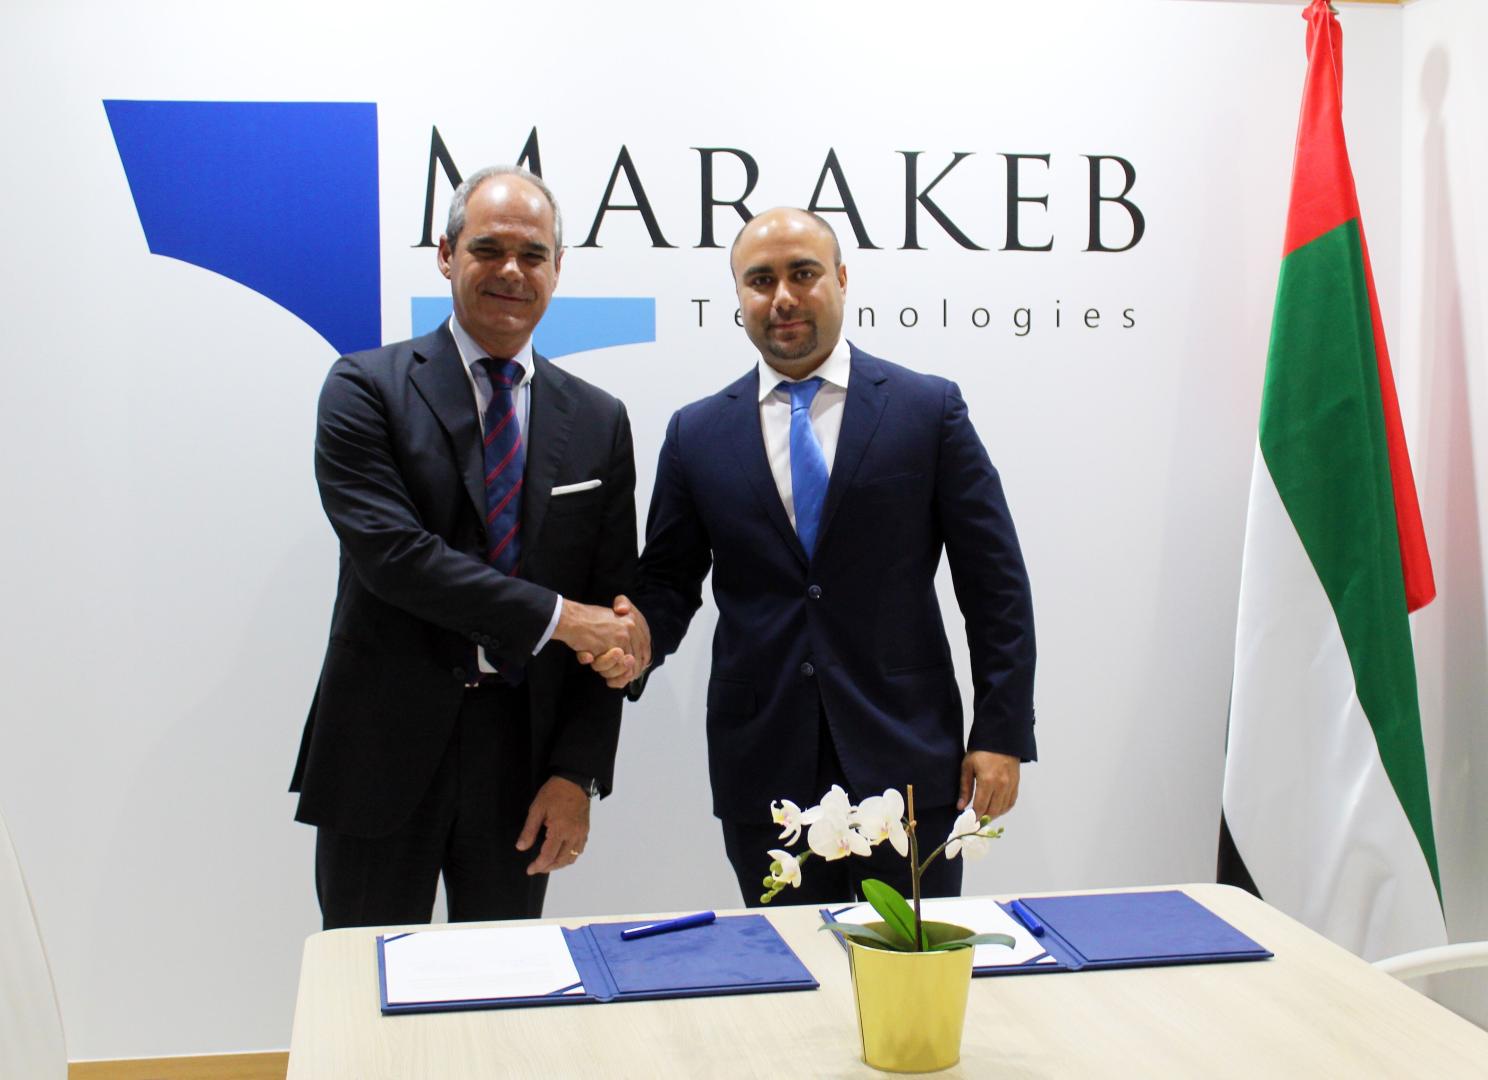 Giuseppe Giordo, General Manager of Fincantieri Naval Business and Basel Shuhaiber, Chief Executive Officer of Marakeb Technologies